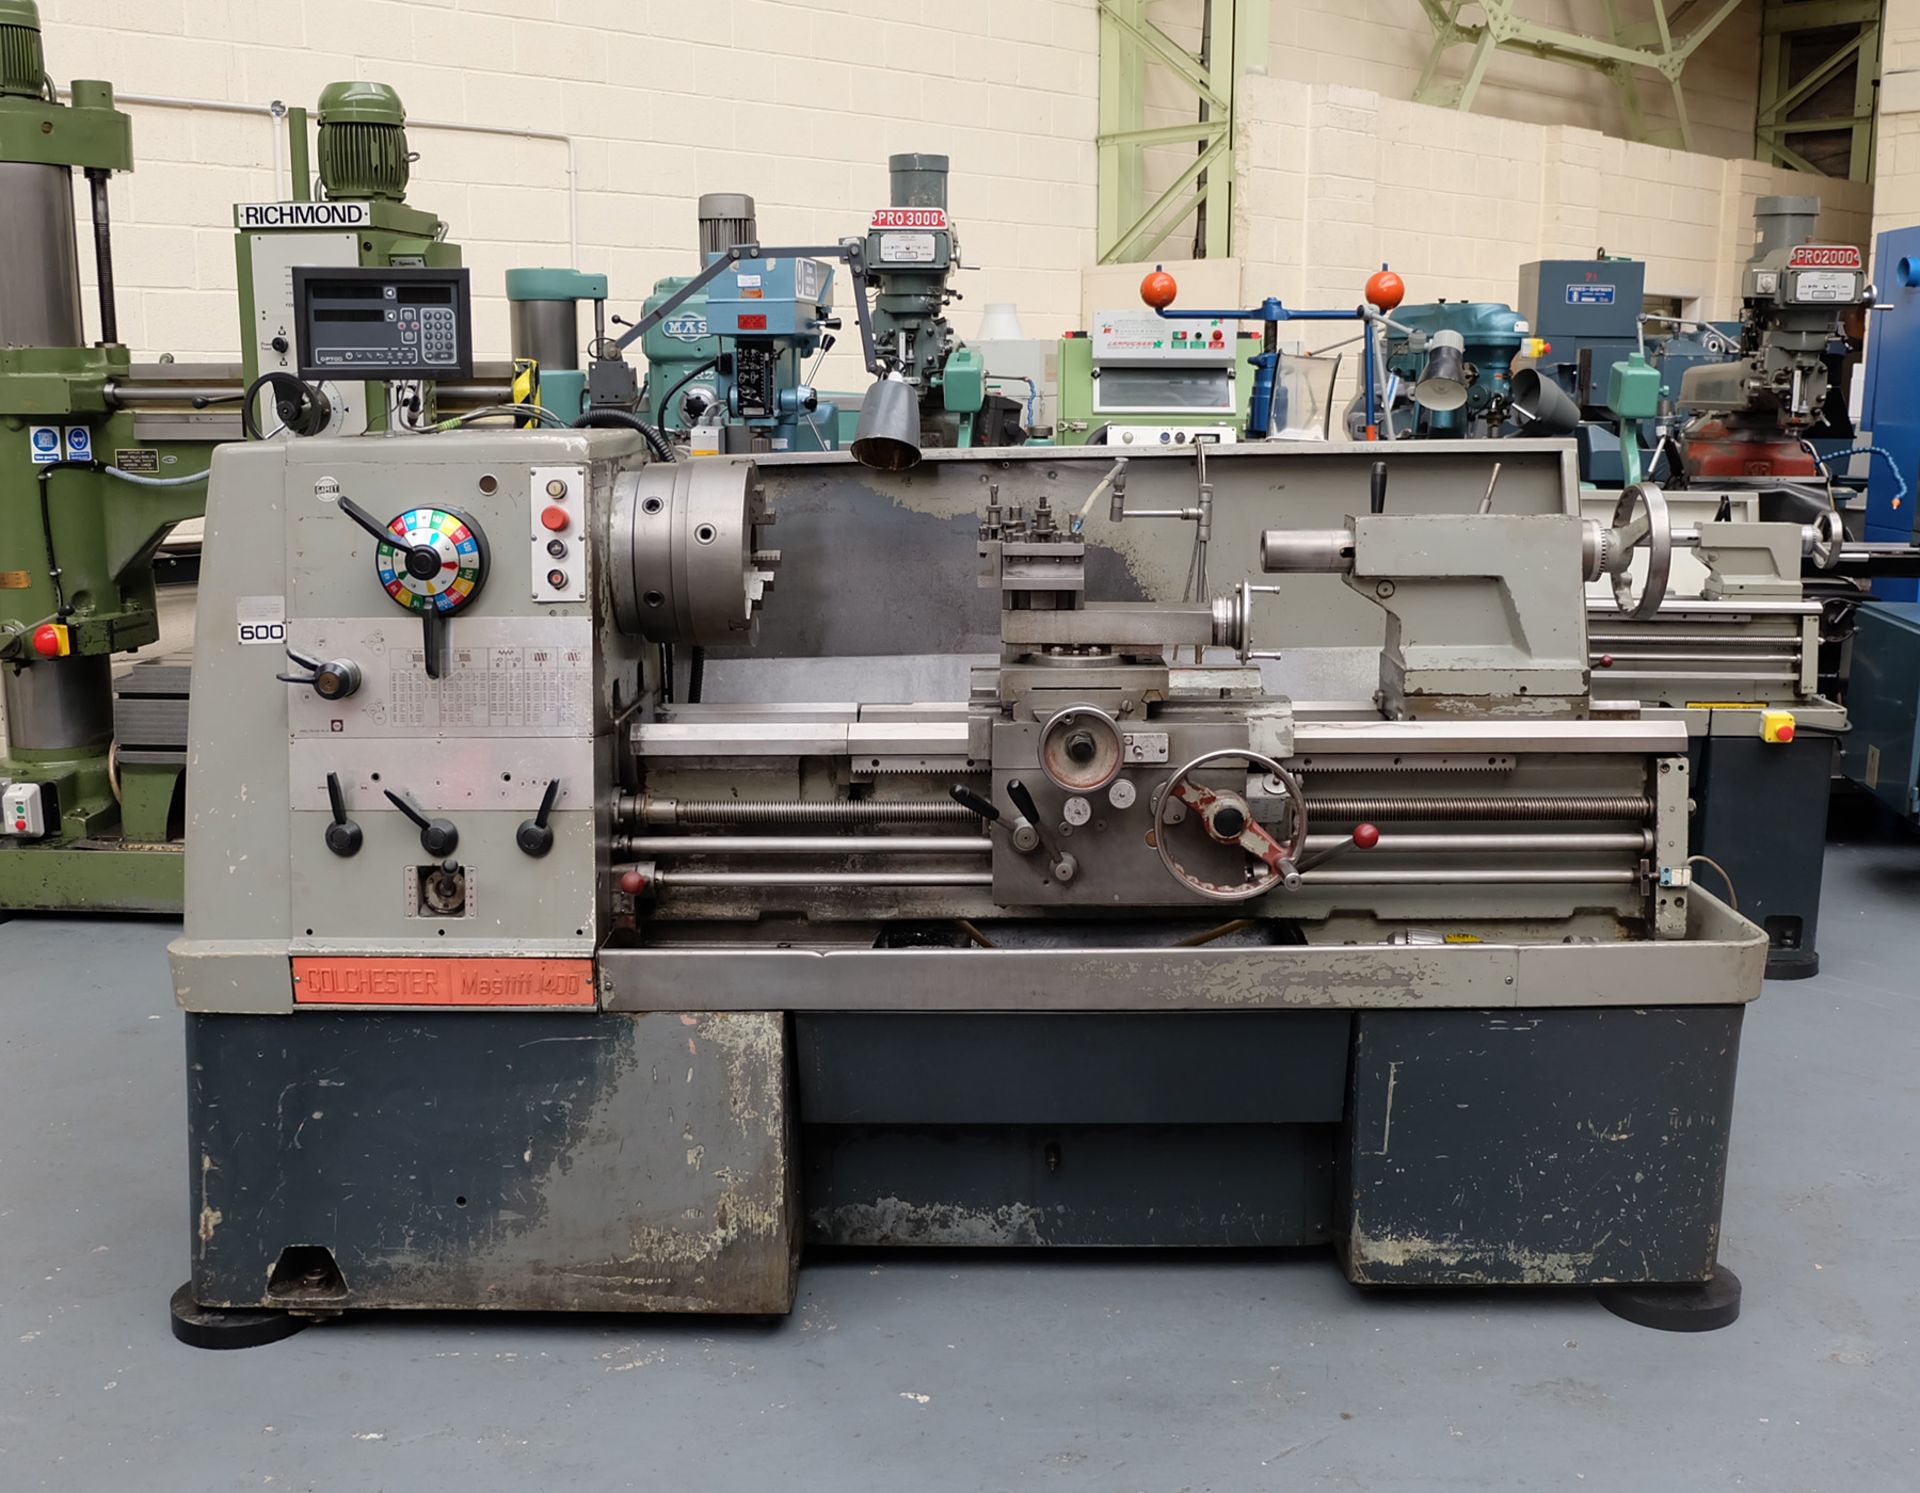 Colchester Mastiff 1400 Gap Bed Centre Lathe. 21" Swing Over Bed. 40" Distance Between Centres.